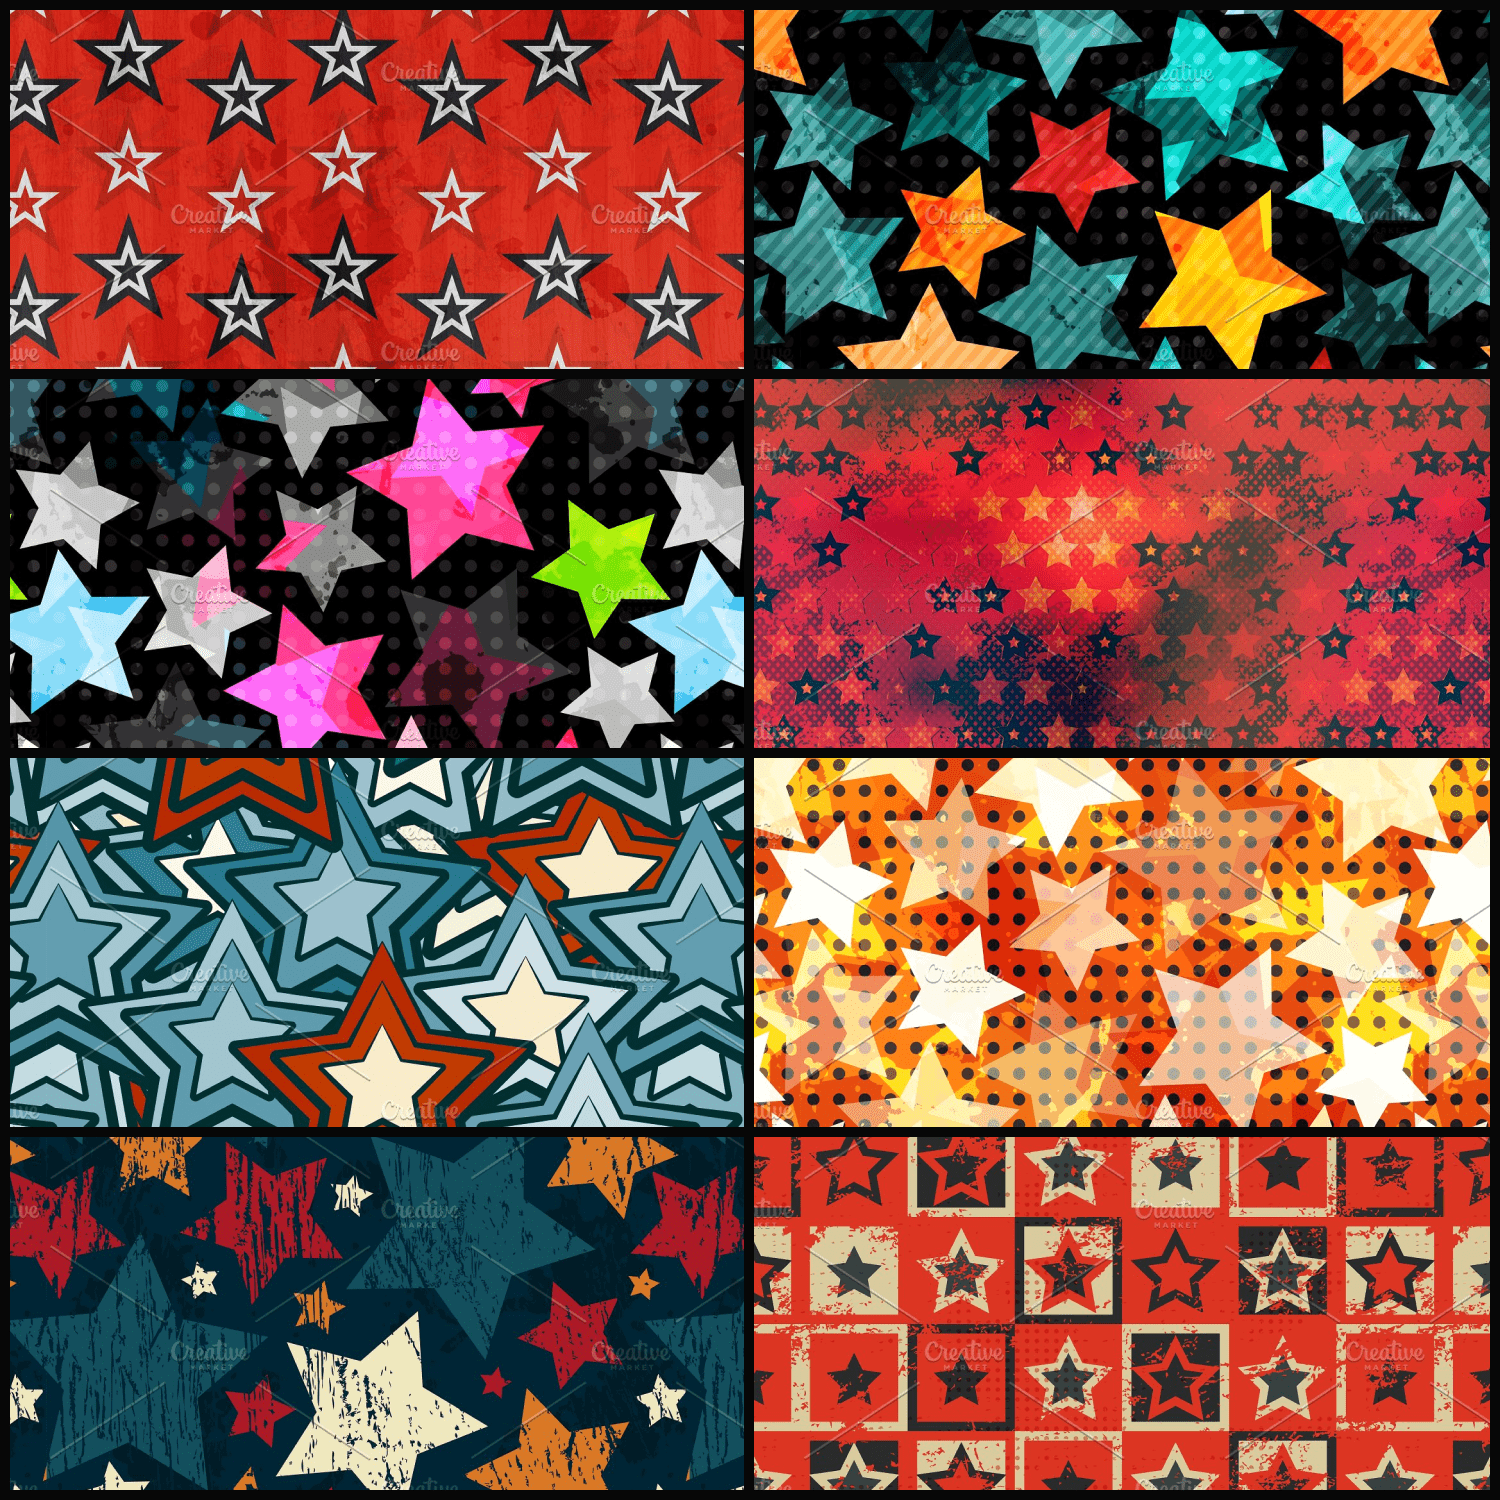 Star Seamless Patterns cover.